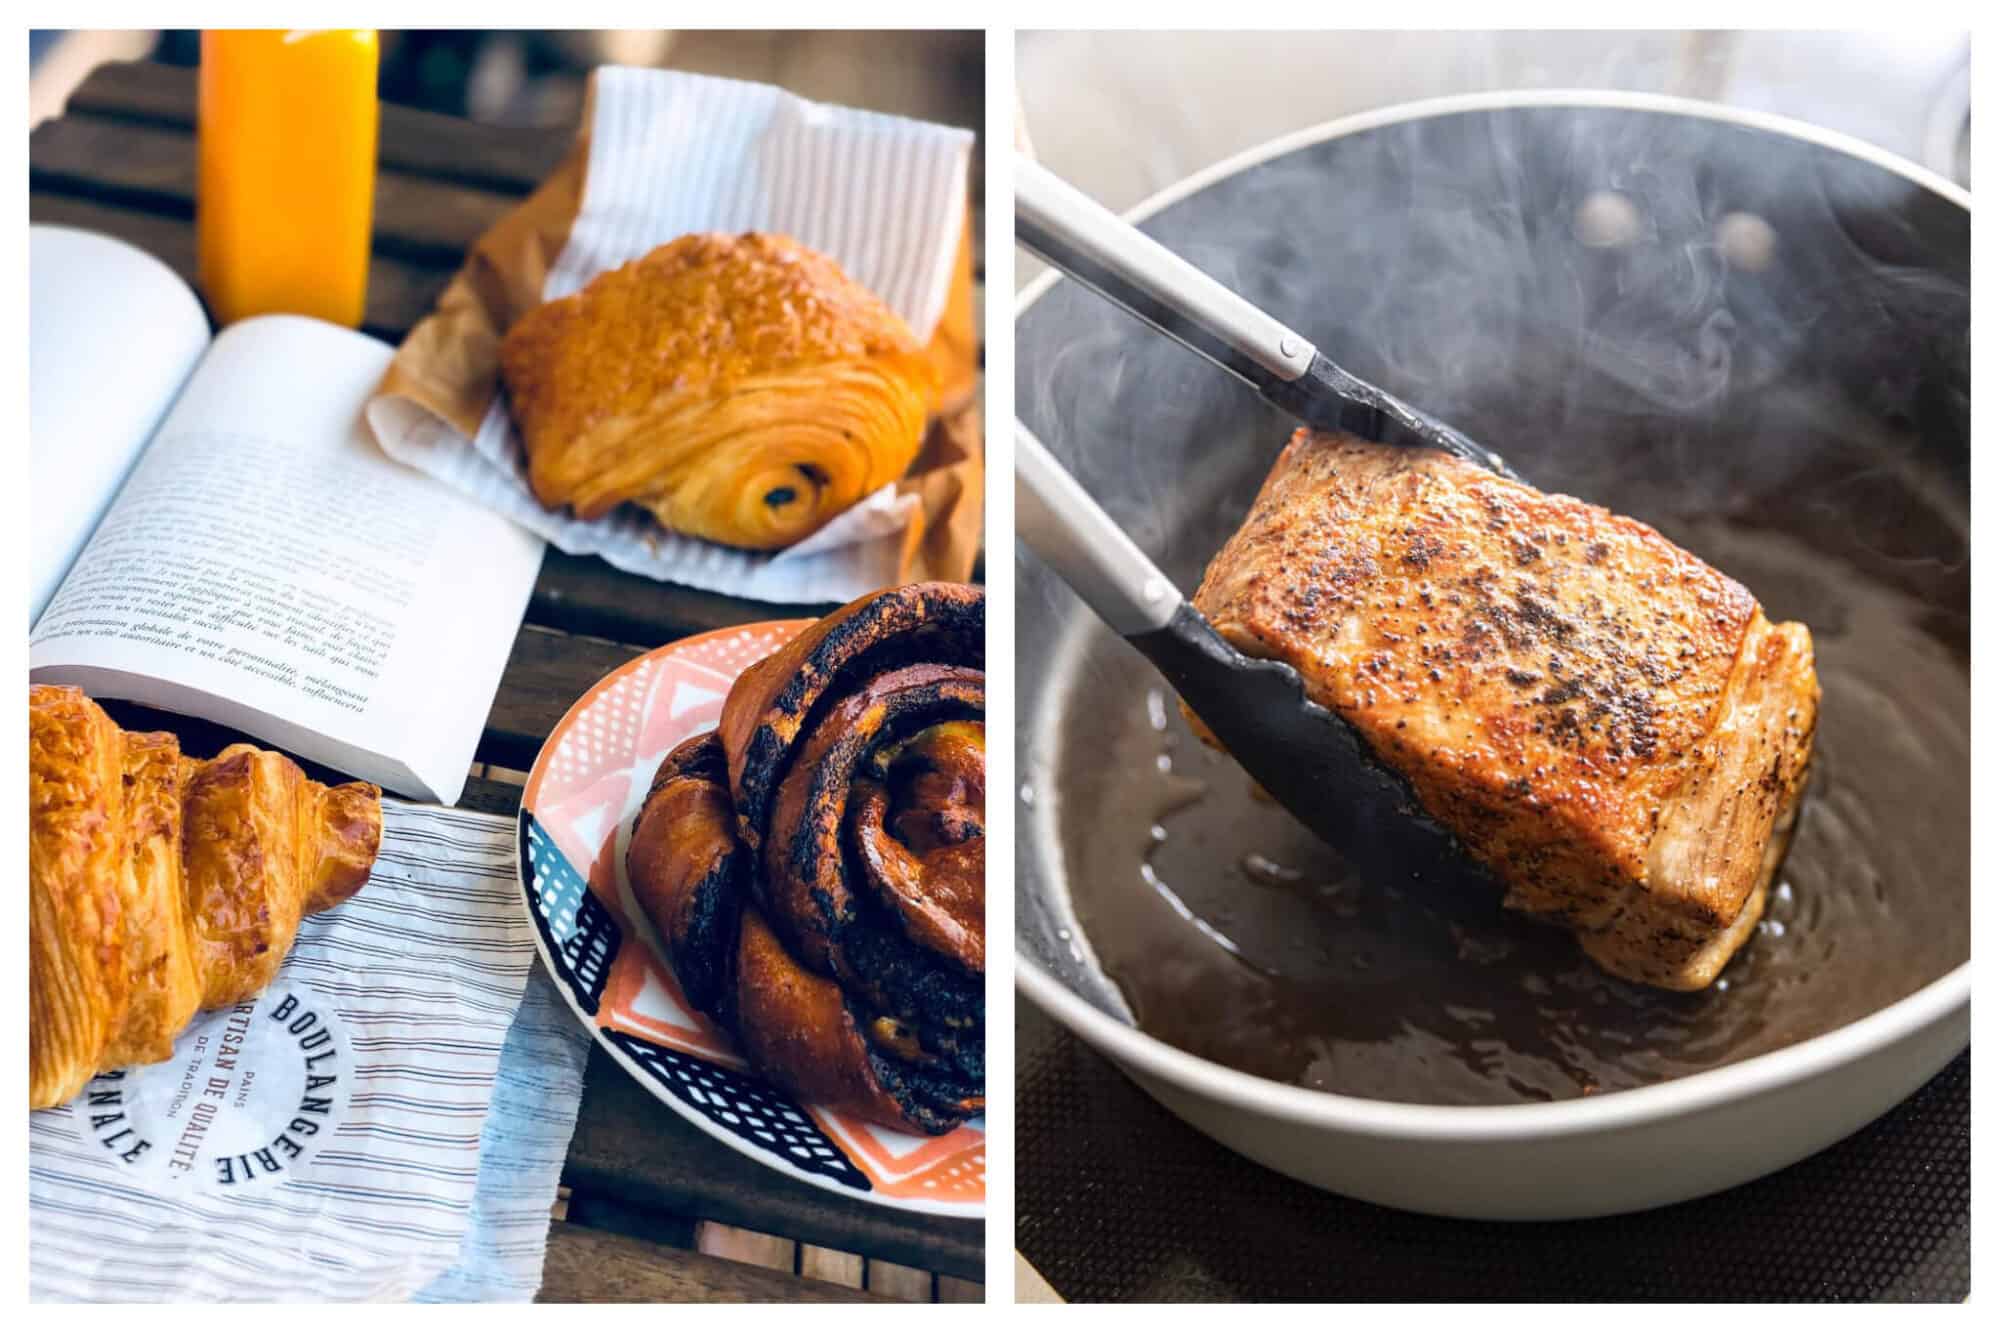 Left: Various pastries, including a pain au chocolat and croissant, sit atop a wodden table next to an open book and a glass of orange juice, Right: A piece of rish is cooked in a pan filled with hot oil, and a pair of tongs coming in from the left side of the frame are used to flip the meat in the pan. 